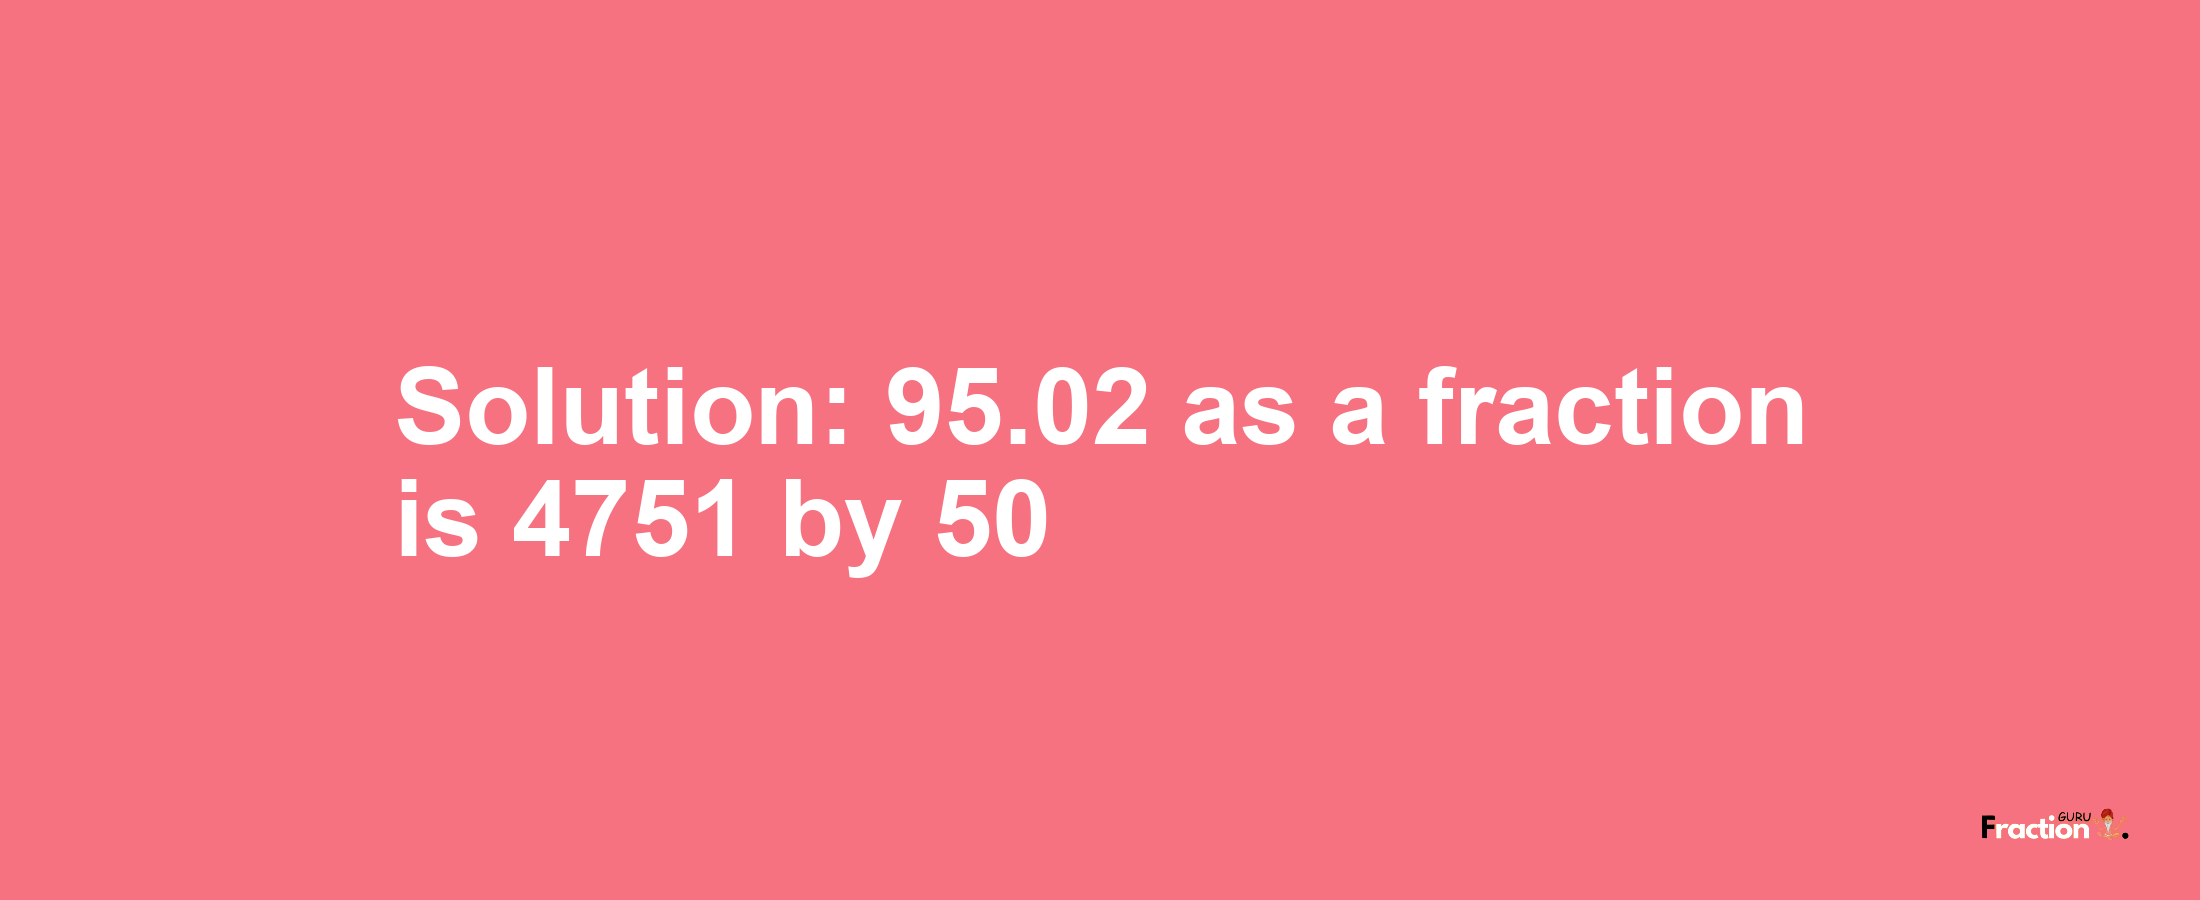 Solution:95.02 as a fraction is 4751/50